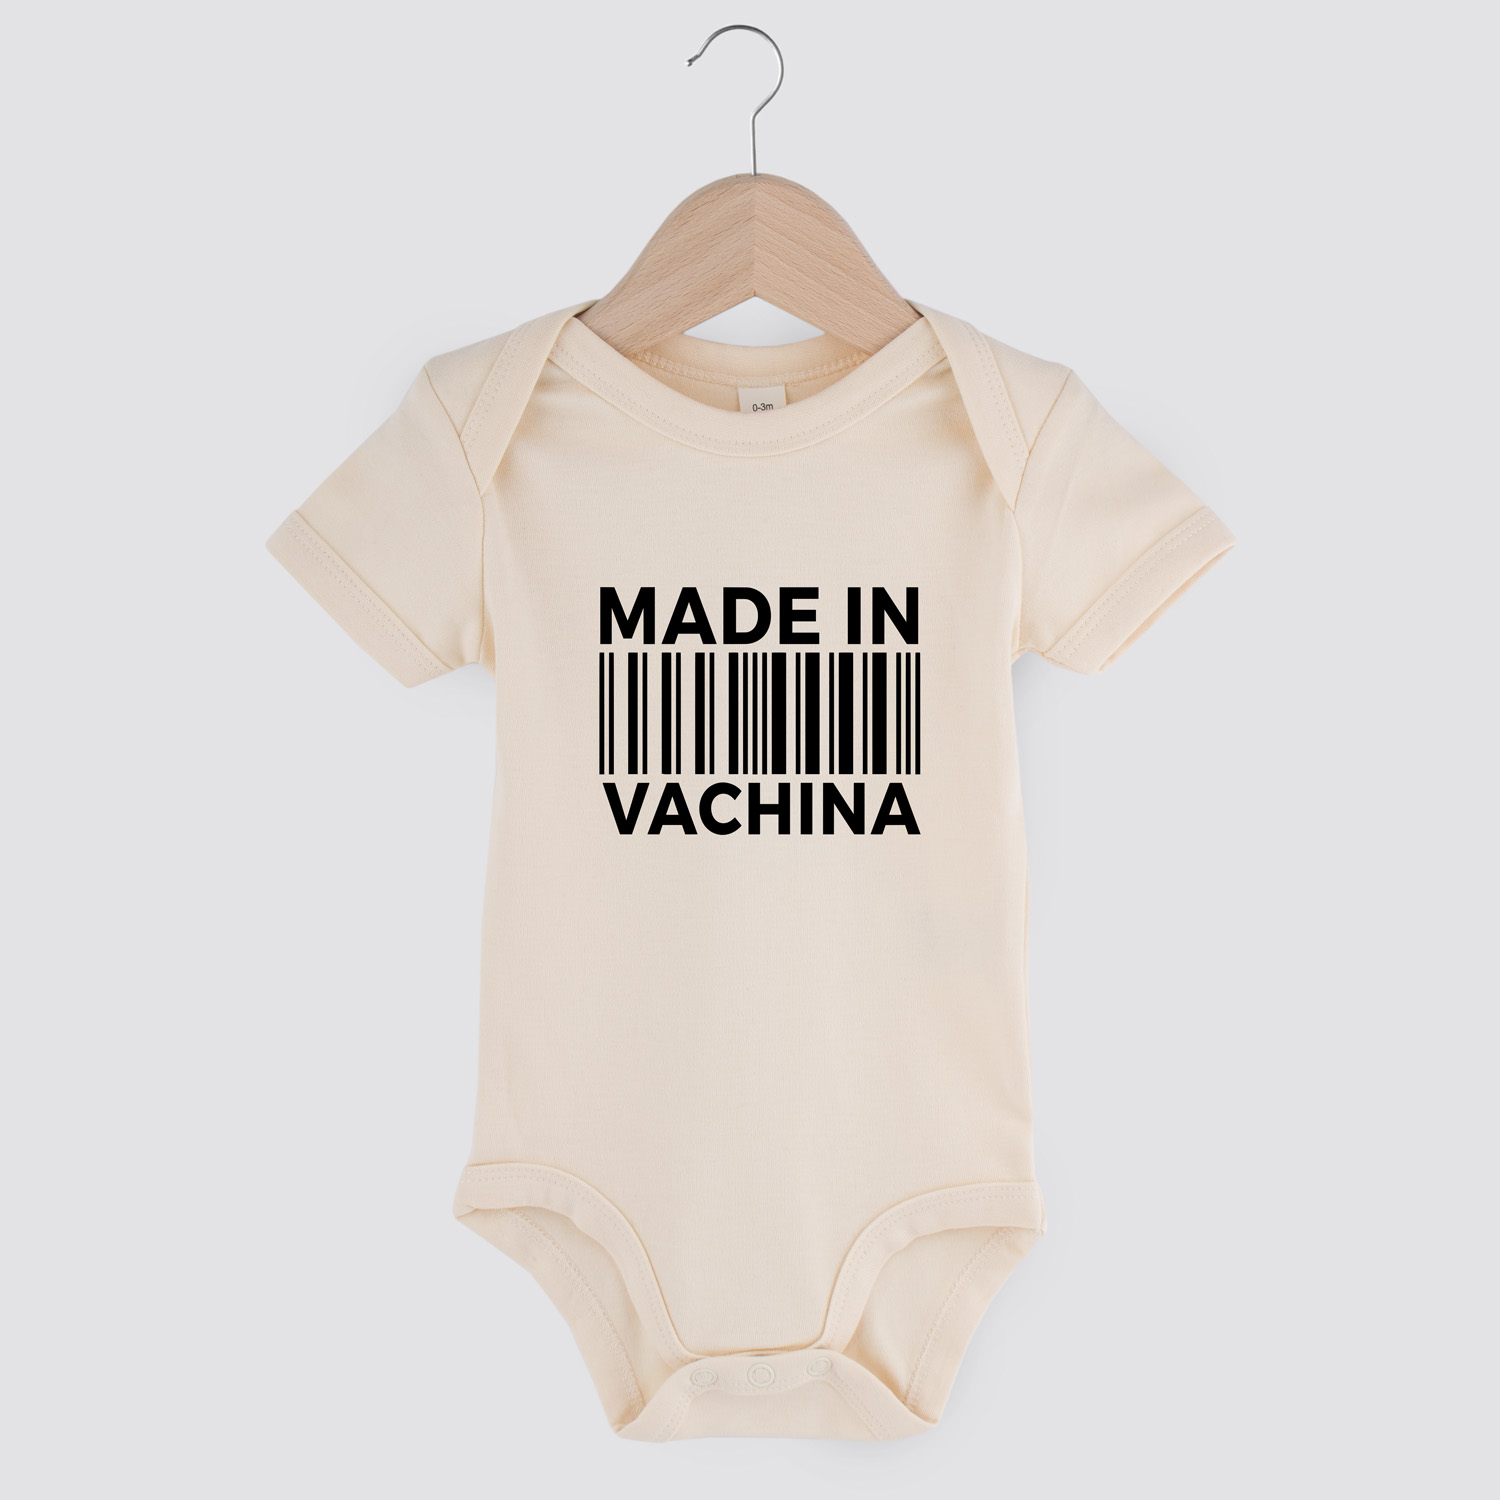 Made in Vachina | Baby romper | my fabulous life.